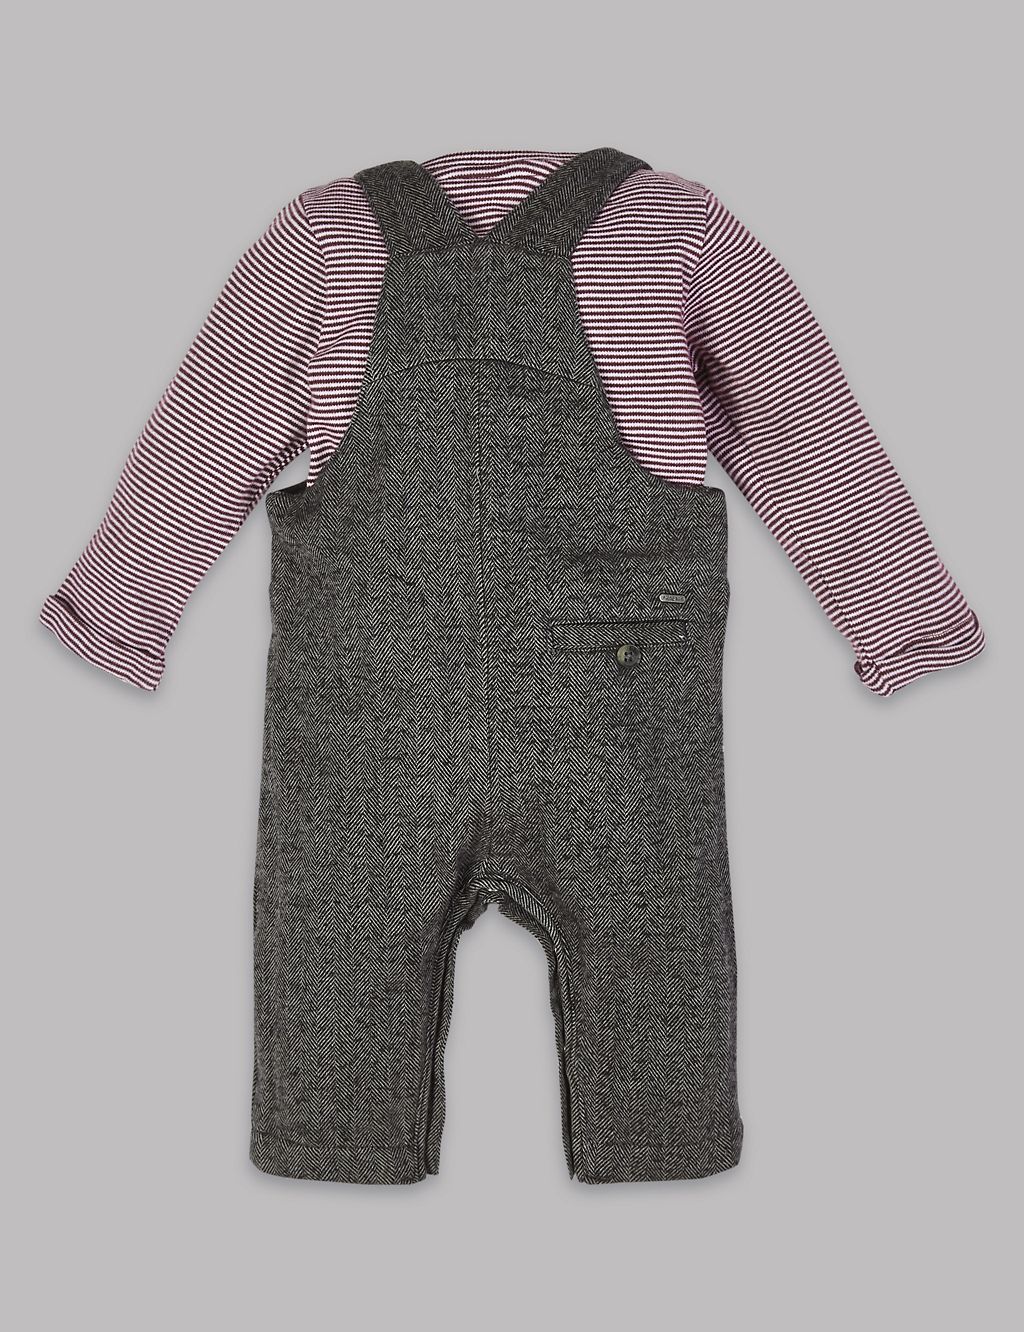 3 Piece Bodysuit & Dungarees with Socks Outfit 1 of 5